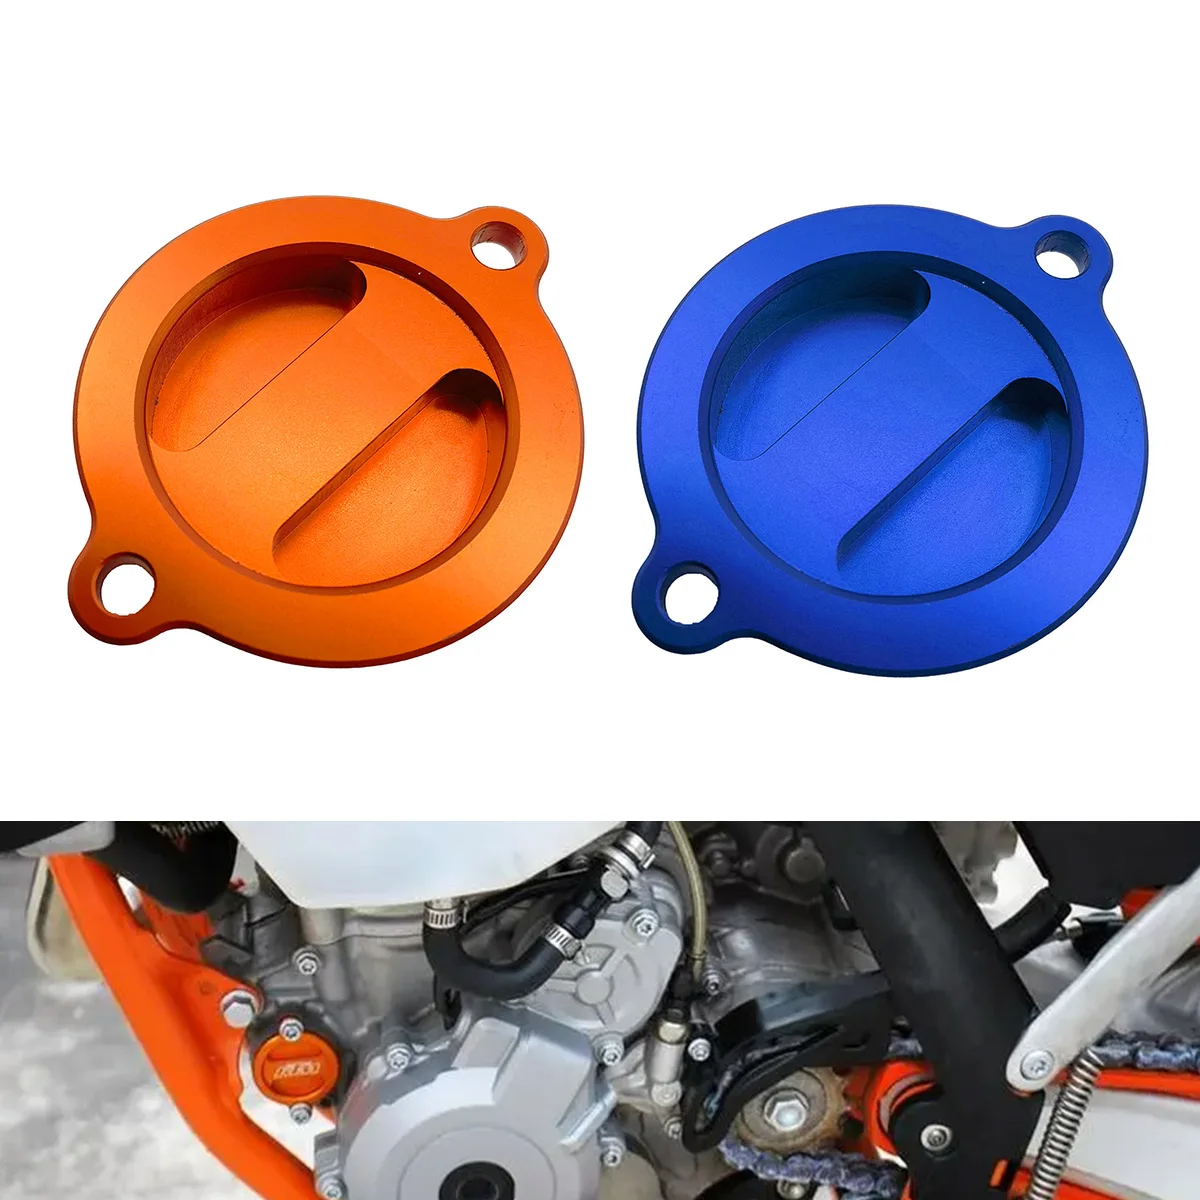 Motocross CNC Engine Oil Filter Cap Cover Plug For KTM SXF XCF XCW EXCF XCF-W FREERIDE FC FE 250 350 400 450 500 530 2013-2022